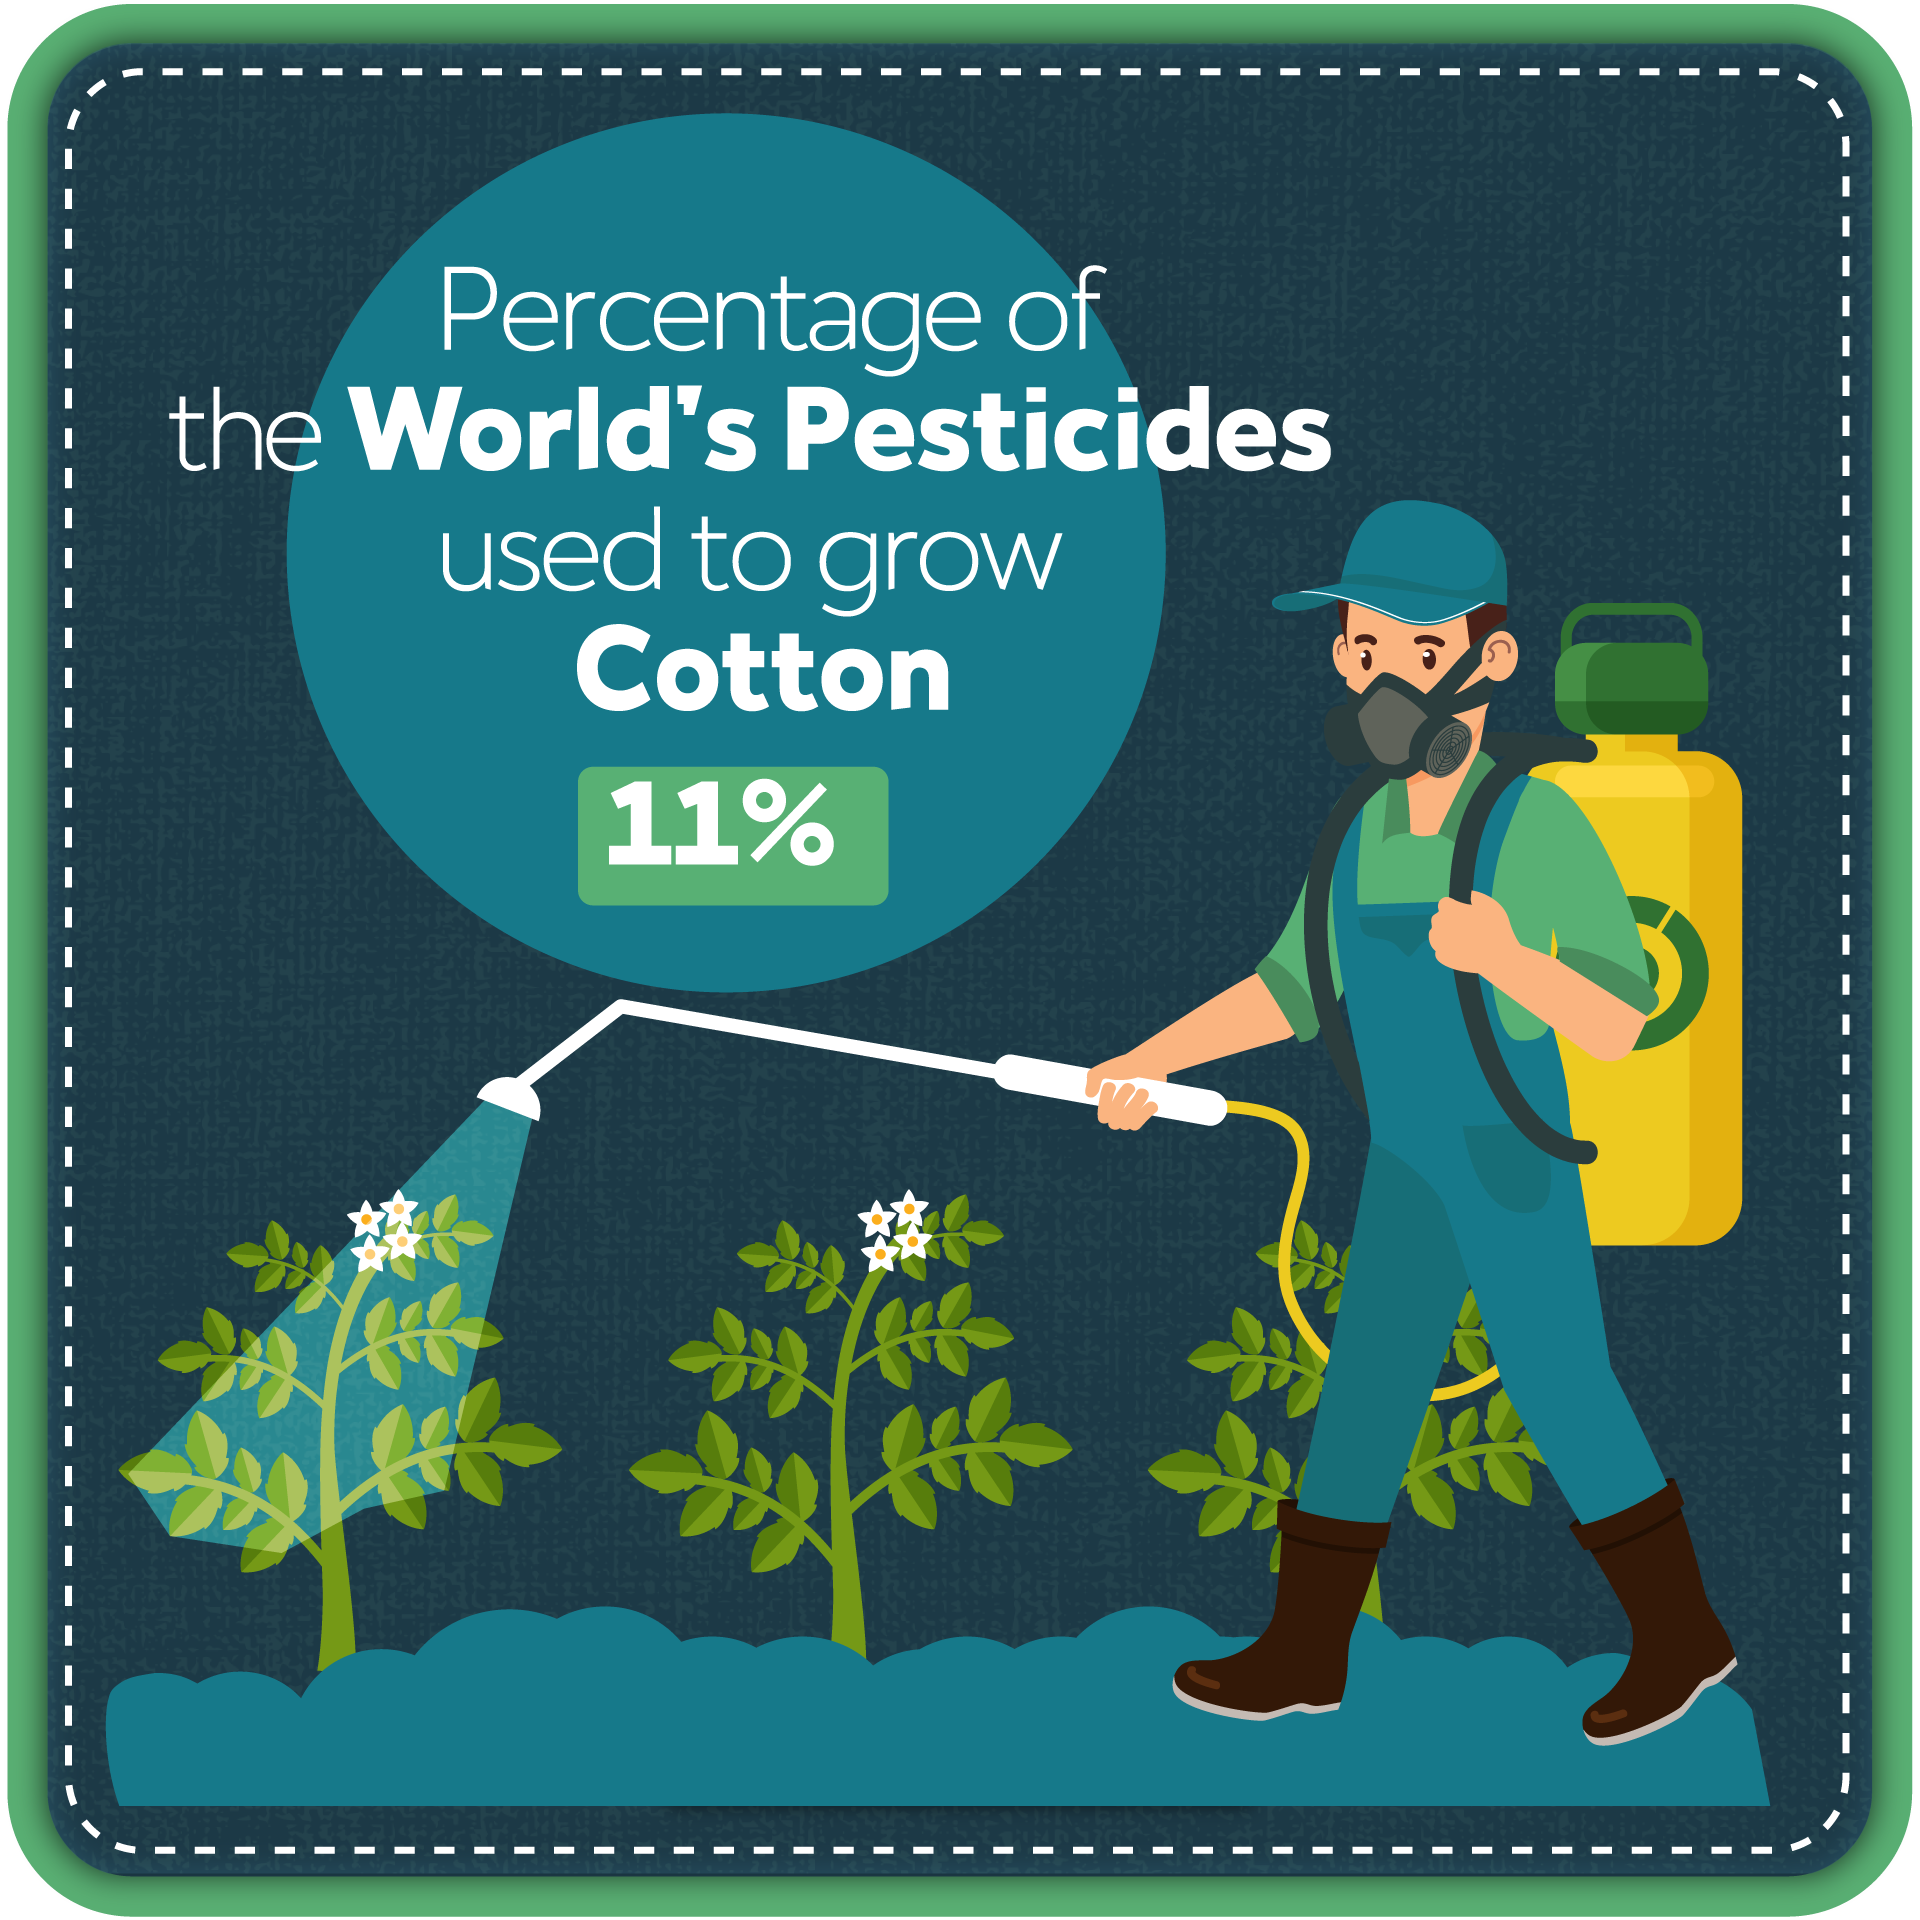 Pesticides used to grow cotton